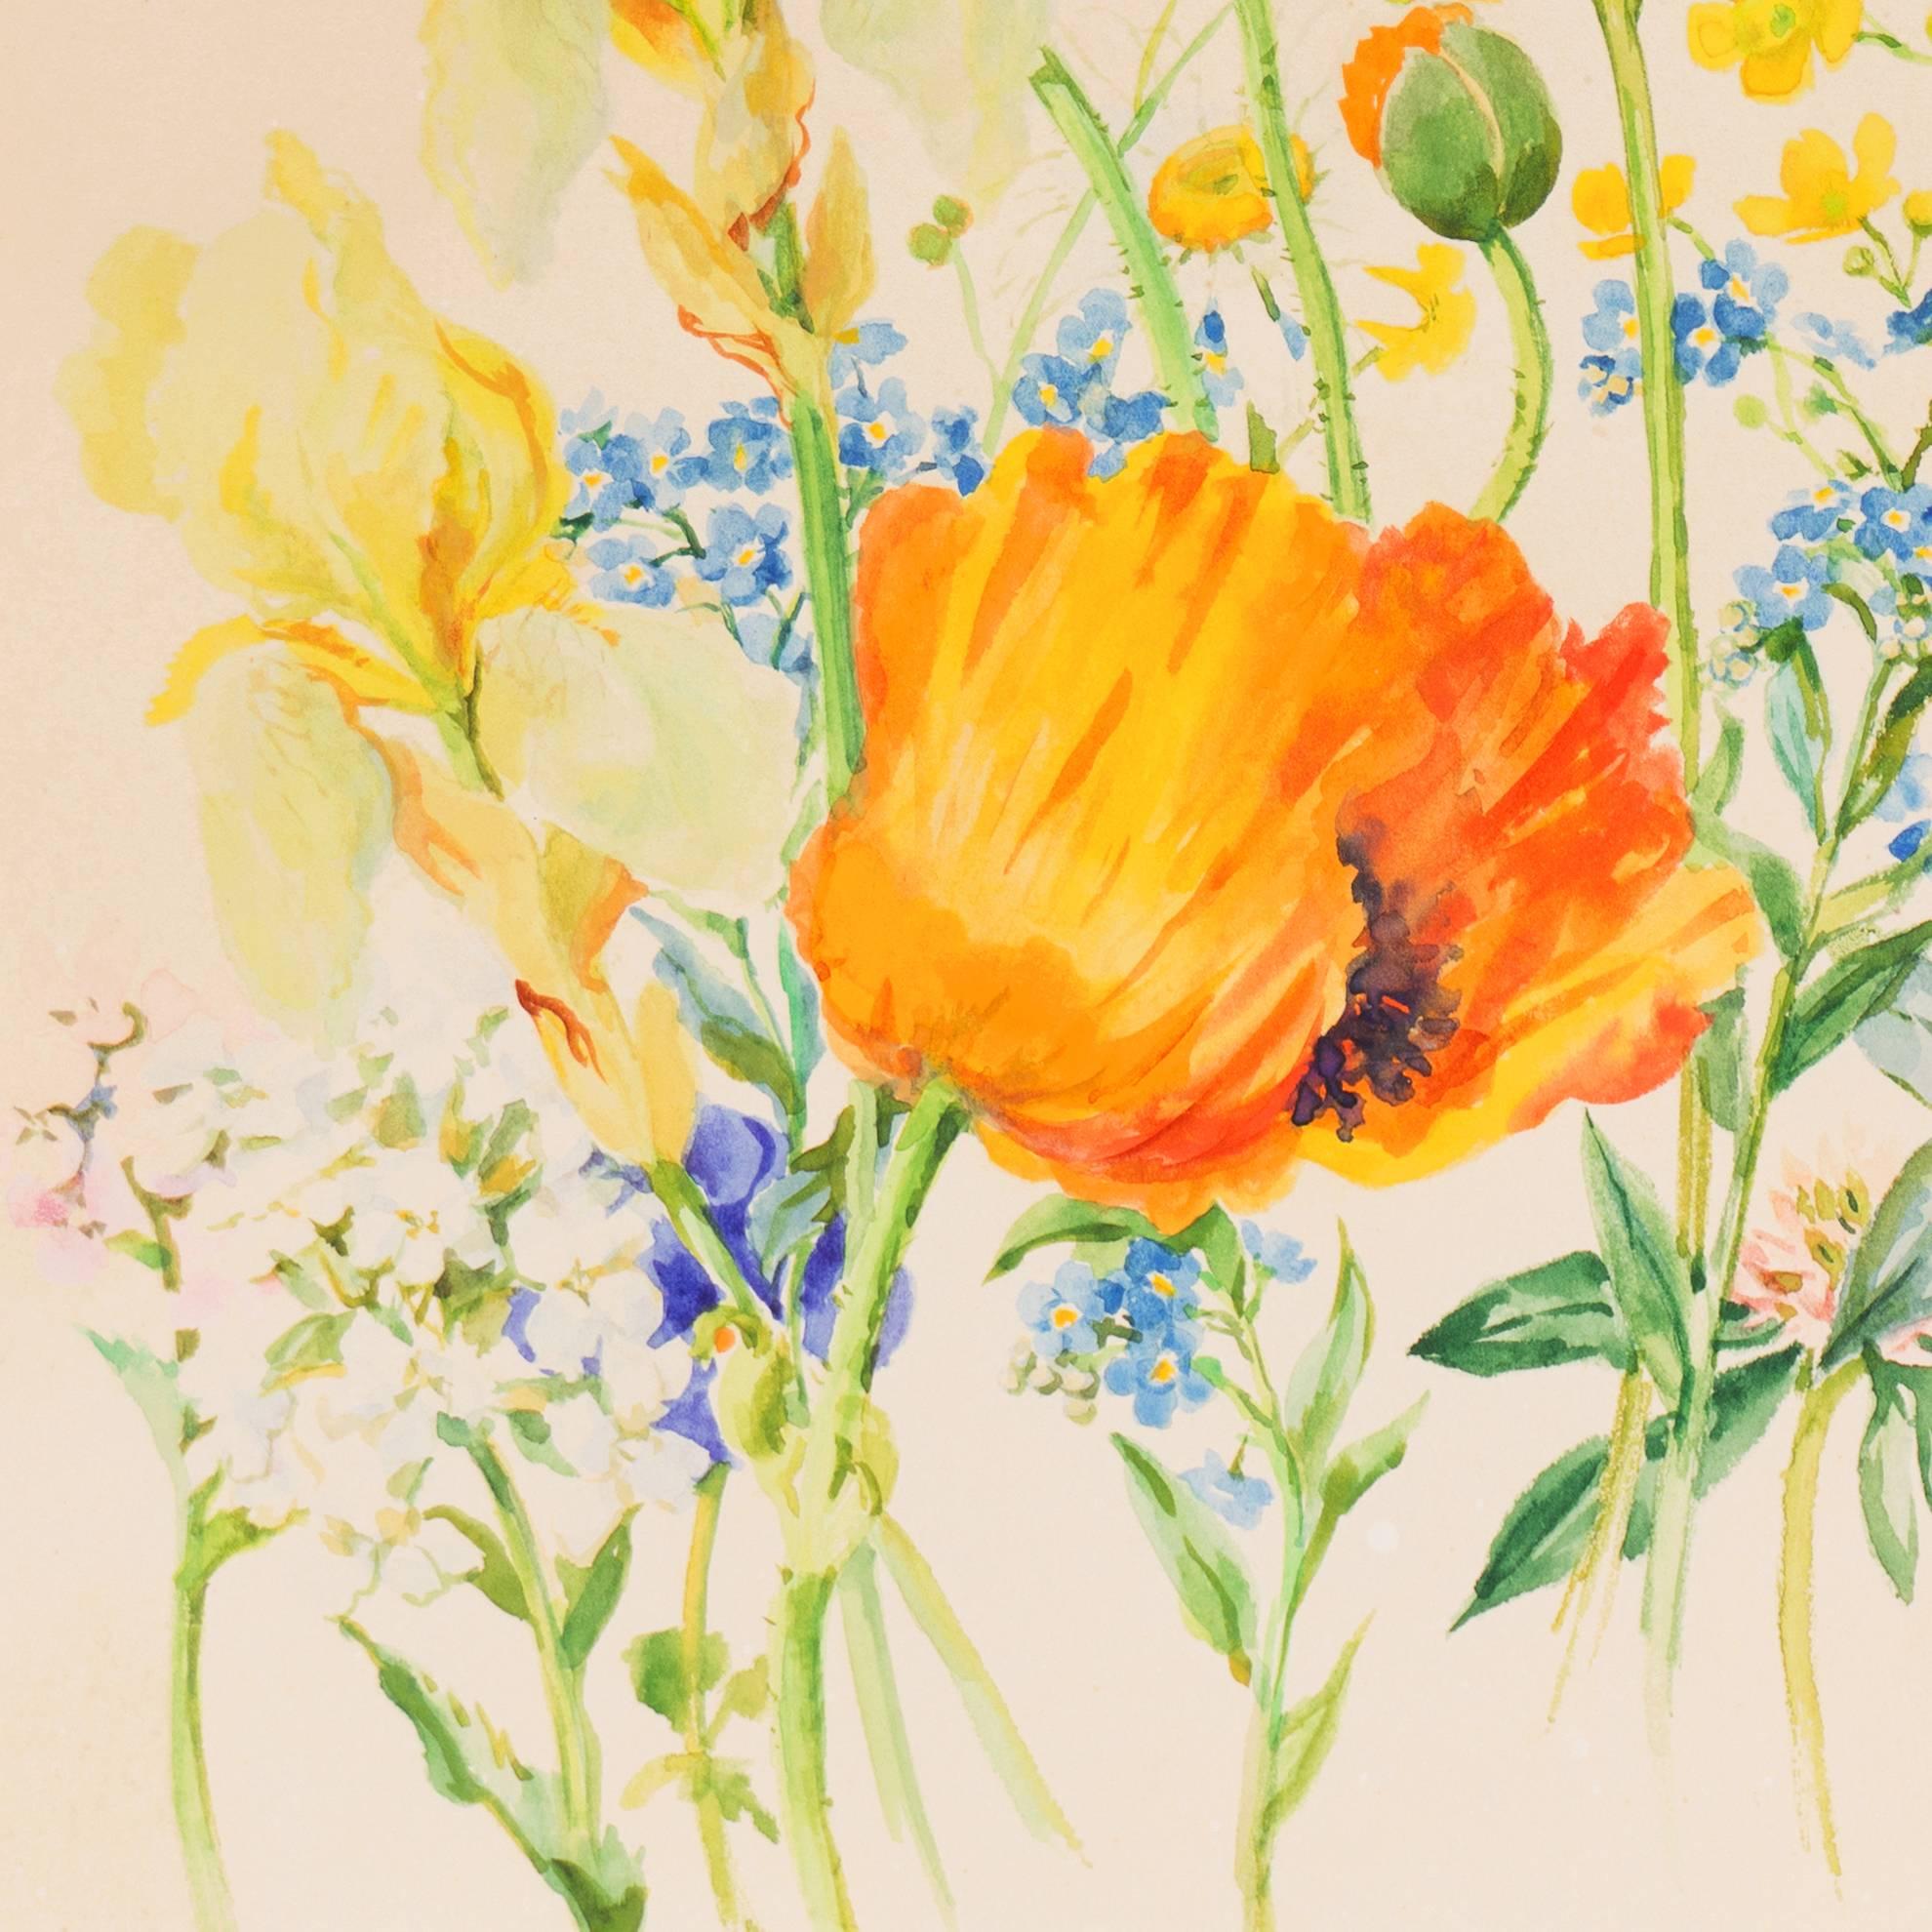 Botanical Study with Poppies  (Russian, Romanoff, Duchess, Royal Family, Queen) 1